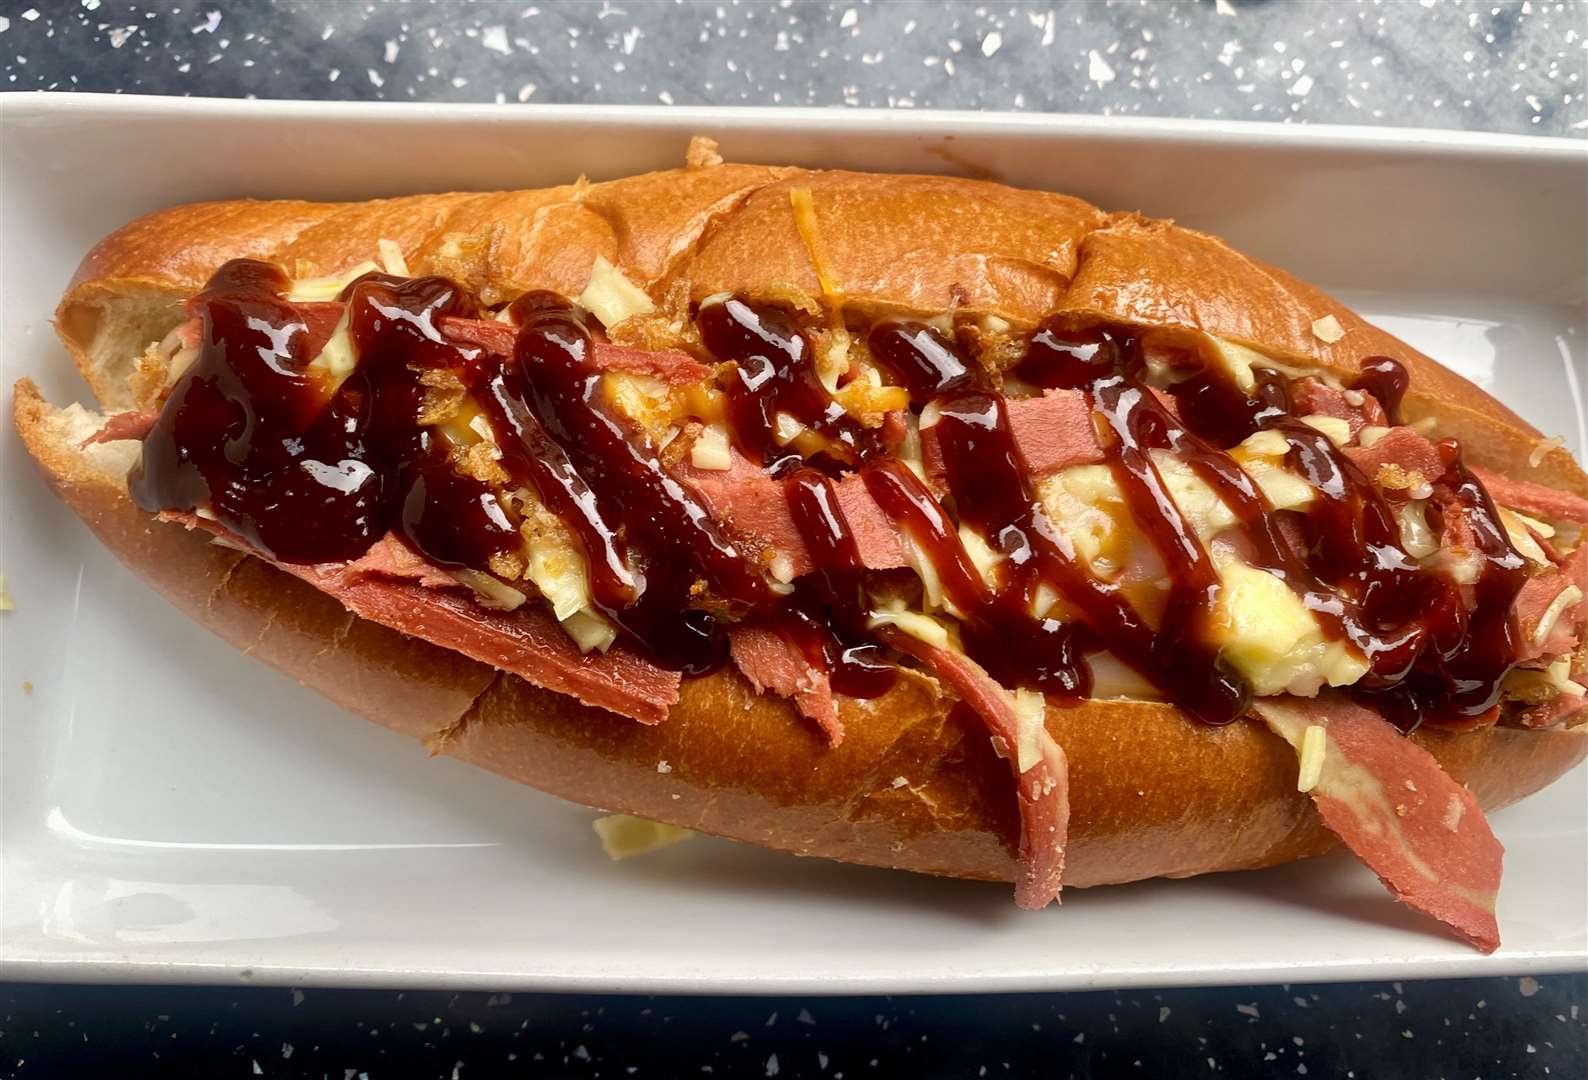 The bourbon hot dog was a Bavarian sausage in a soft roll topped with BBQ sauce, onions, 'cheeze' and vegetarian bacon bits